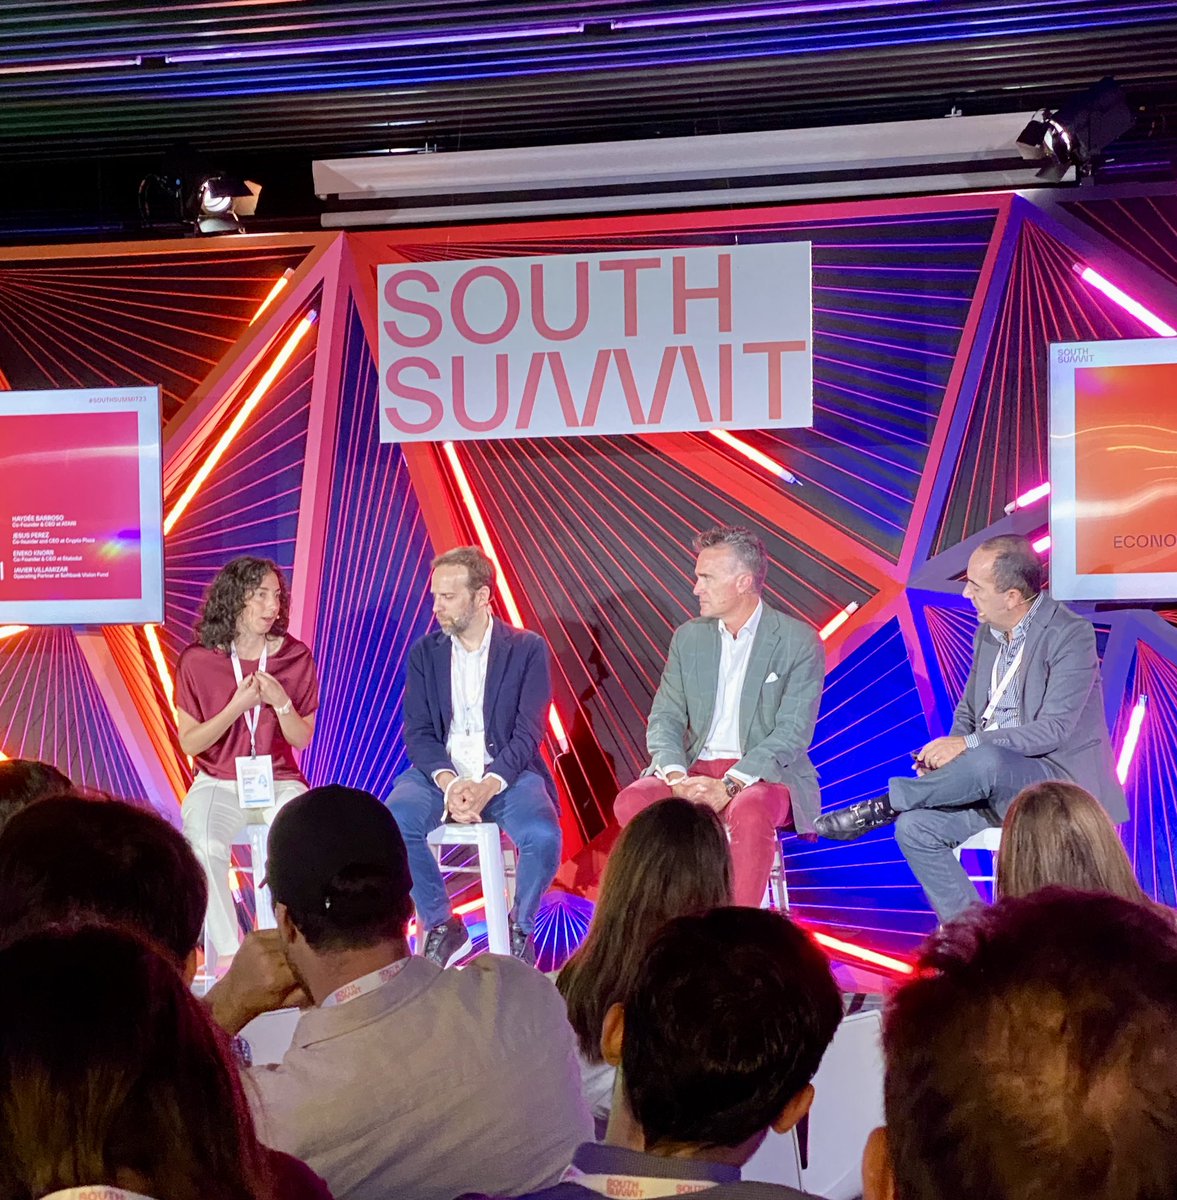 Madrid @south_summit “Token Economy Bubble” Reflecting on SEC lawsuits against companies @binance @coinbase vs EU’s MiCA regulatory framework: Haydee Barroso “You cannot kill crypto. You cannot kill innovation. They will just move.” Do you think US crypto companies will move?